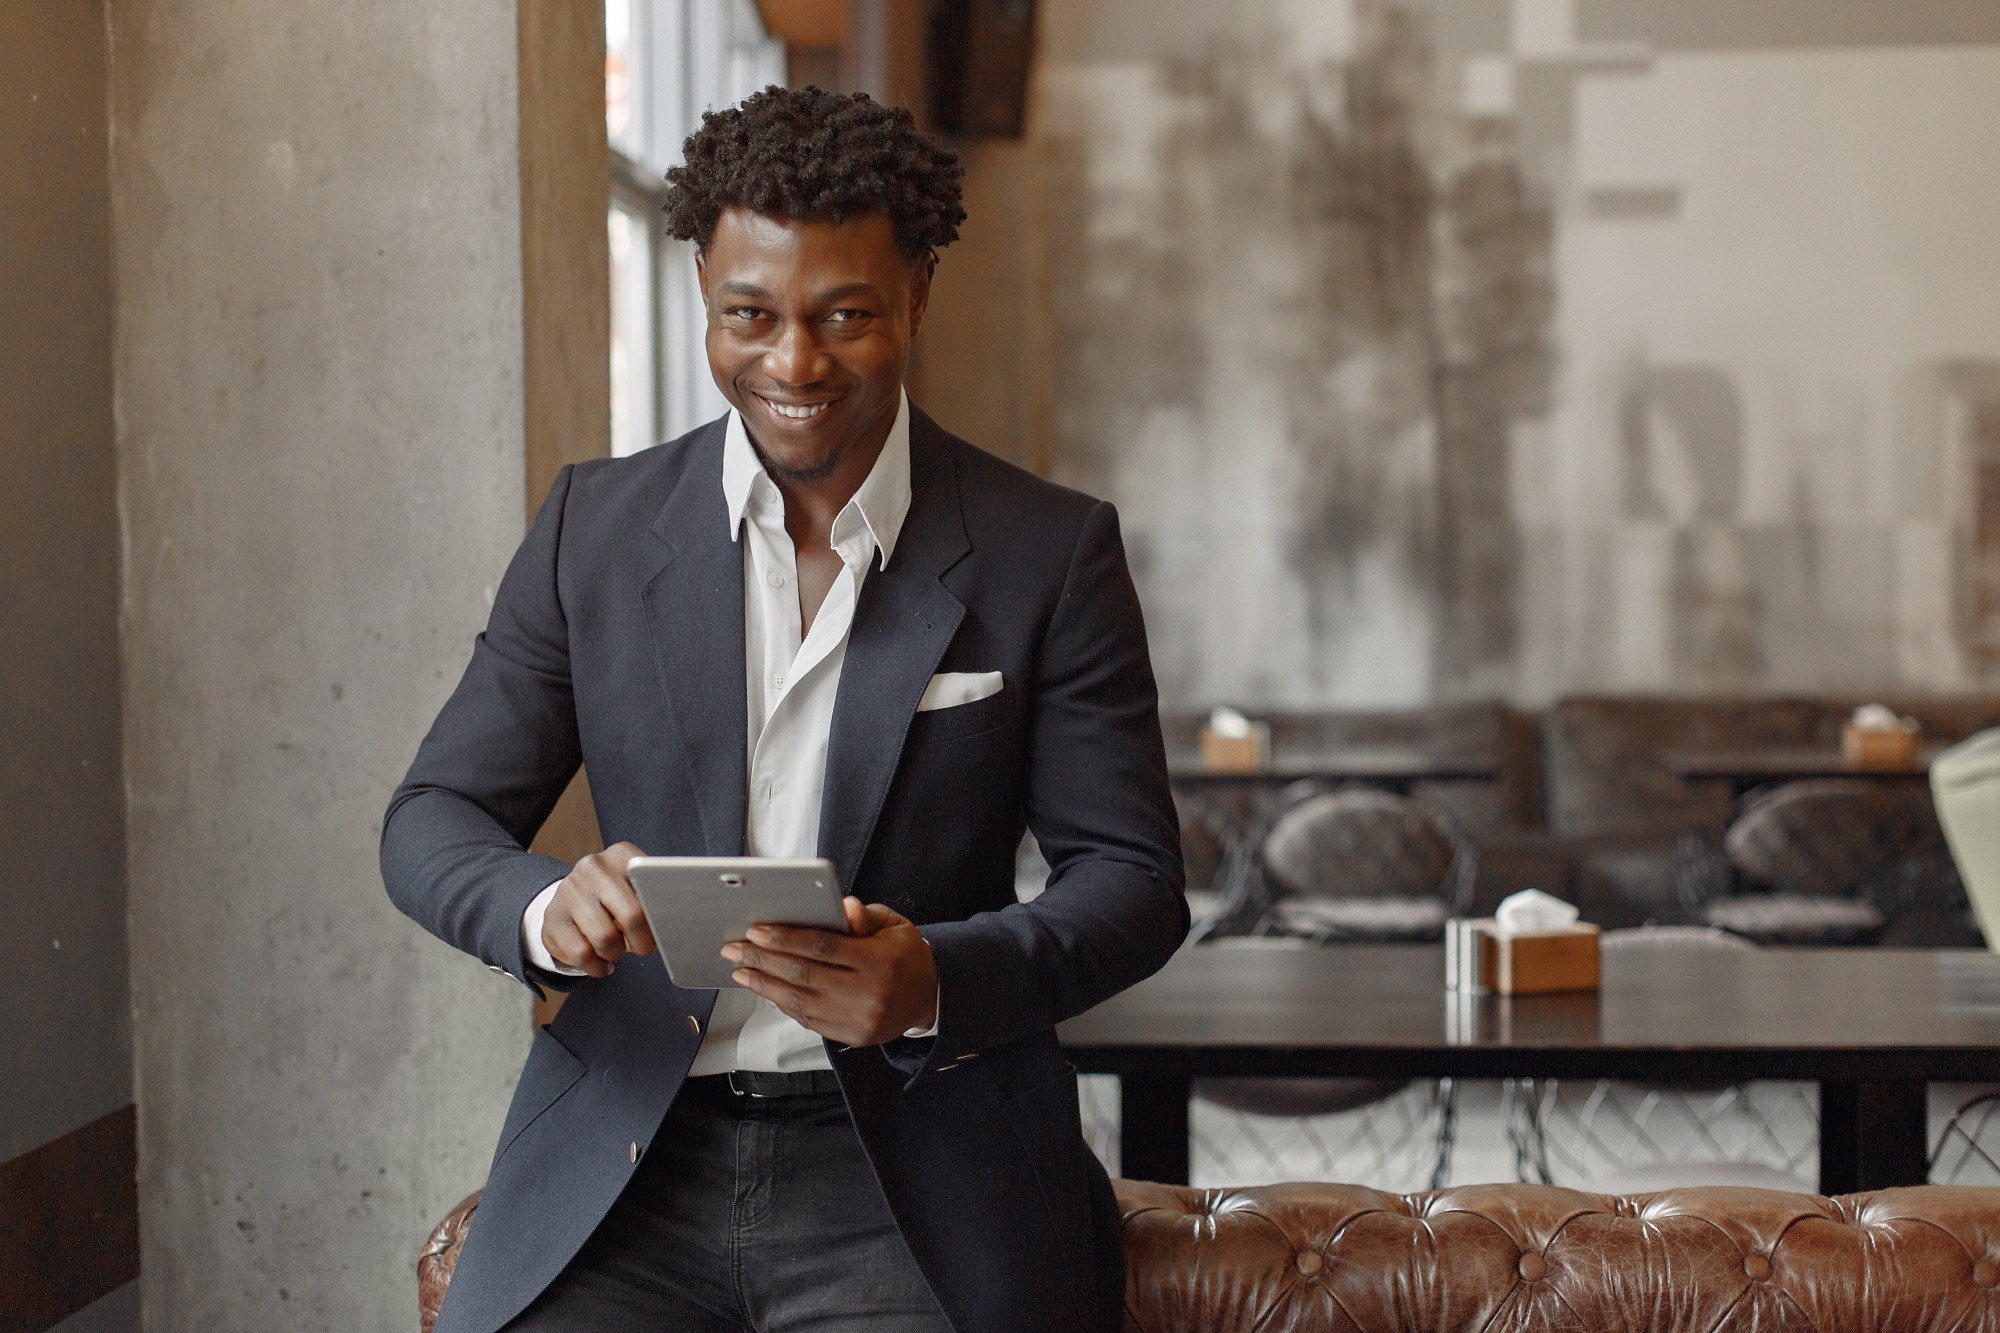 African in a suit on a tablet smiling at the camera